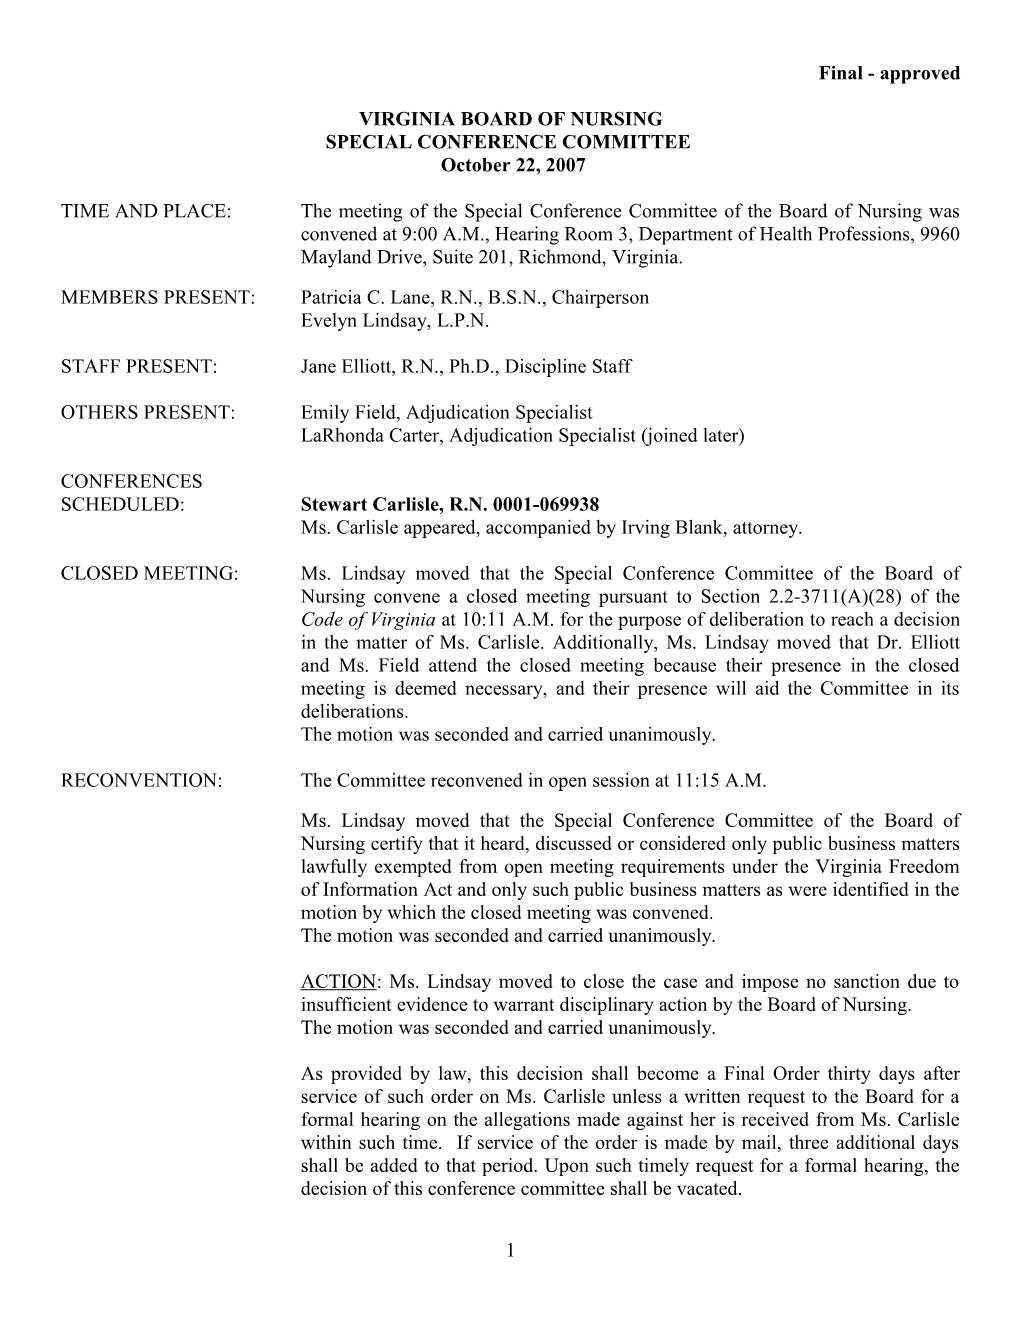 Nursing - Special Conference Committee Minutes - October 22, 2007